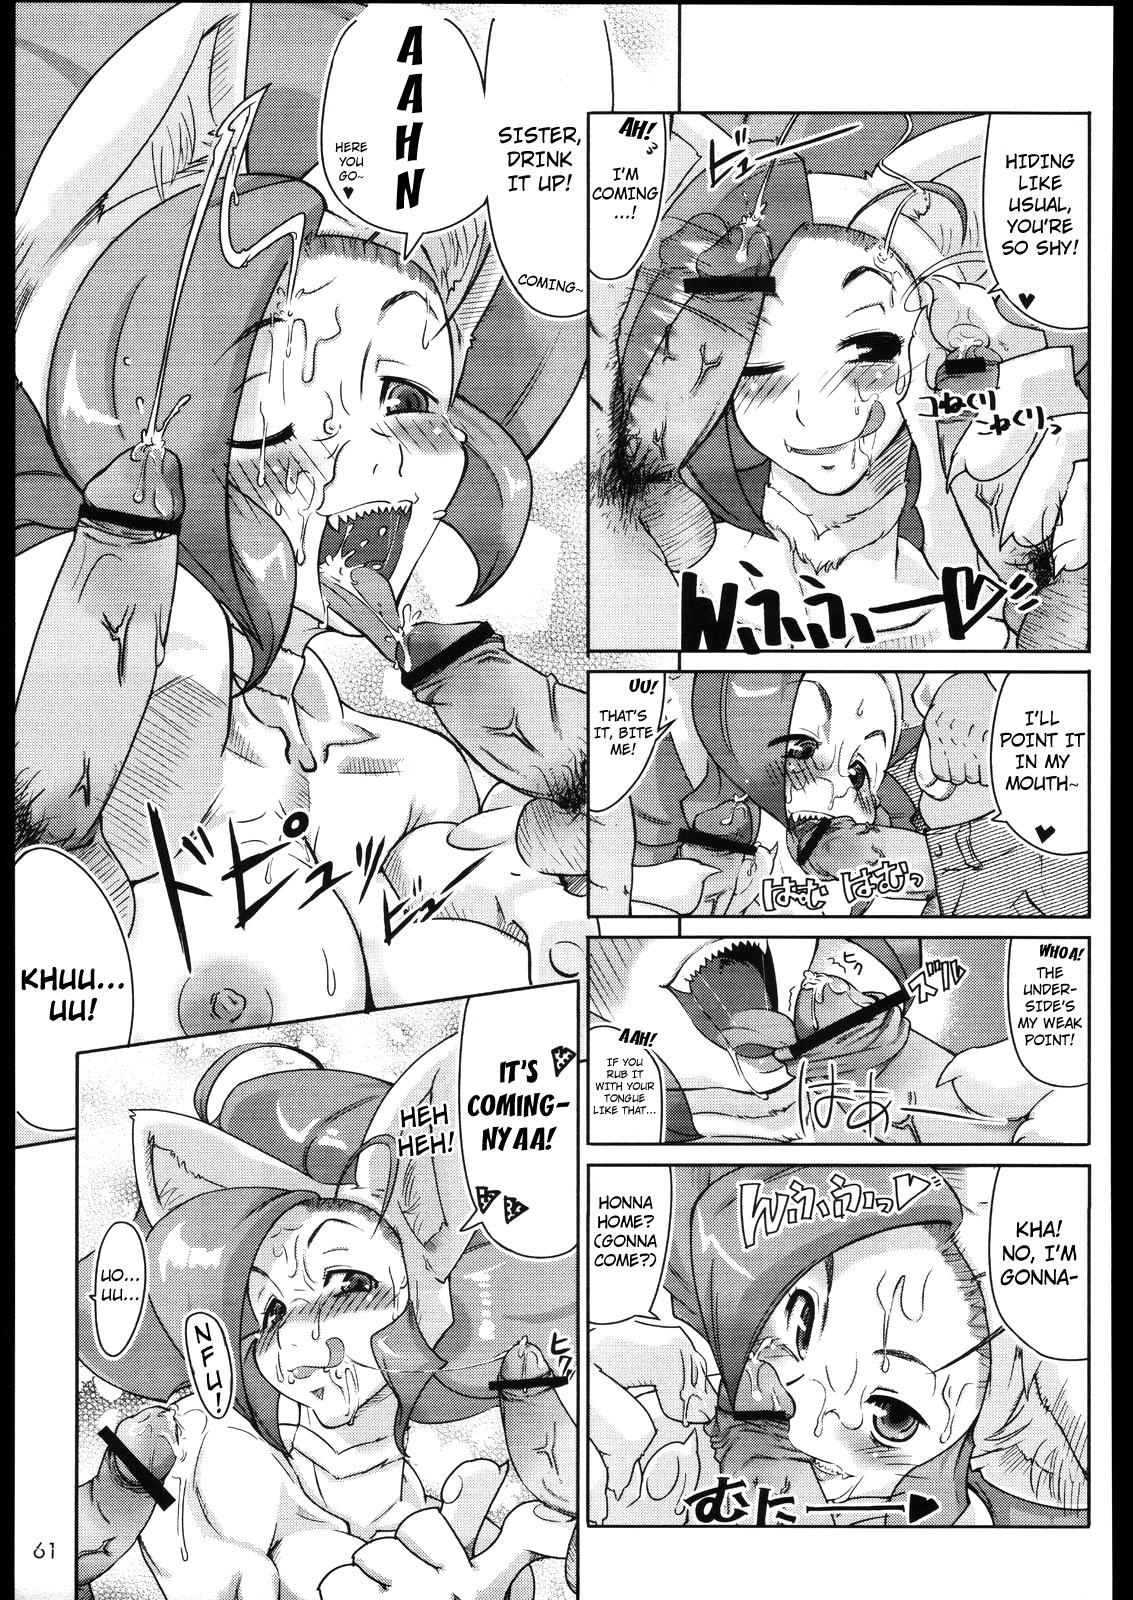 Playing Always Cheerful! - Darkstalkers Ass - Page 7